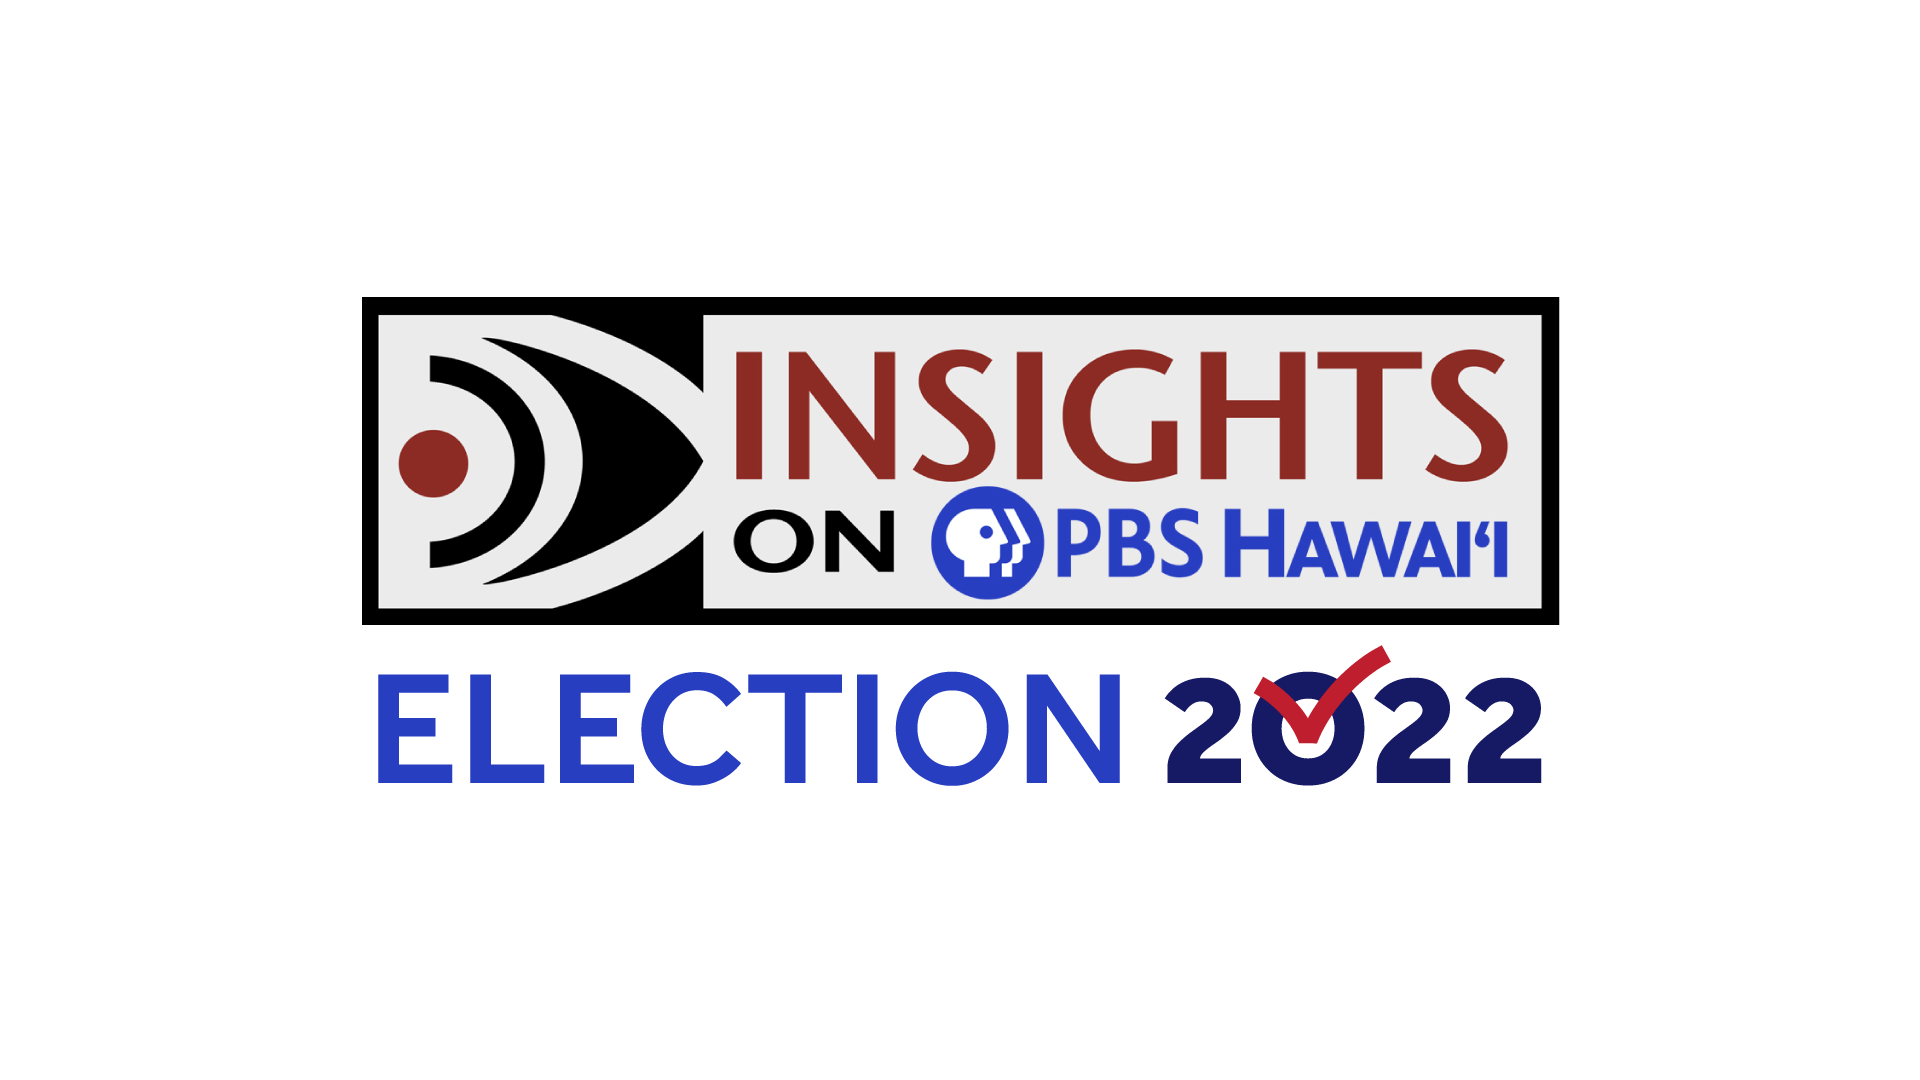 Election 2022 <br/>CANDIDATES: JULY 14 BROADCAST <br/>INSIGHTS ON PBS HAWAIʻI